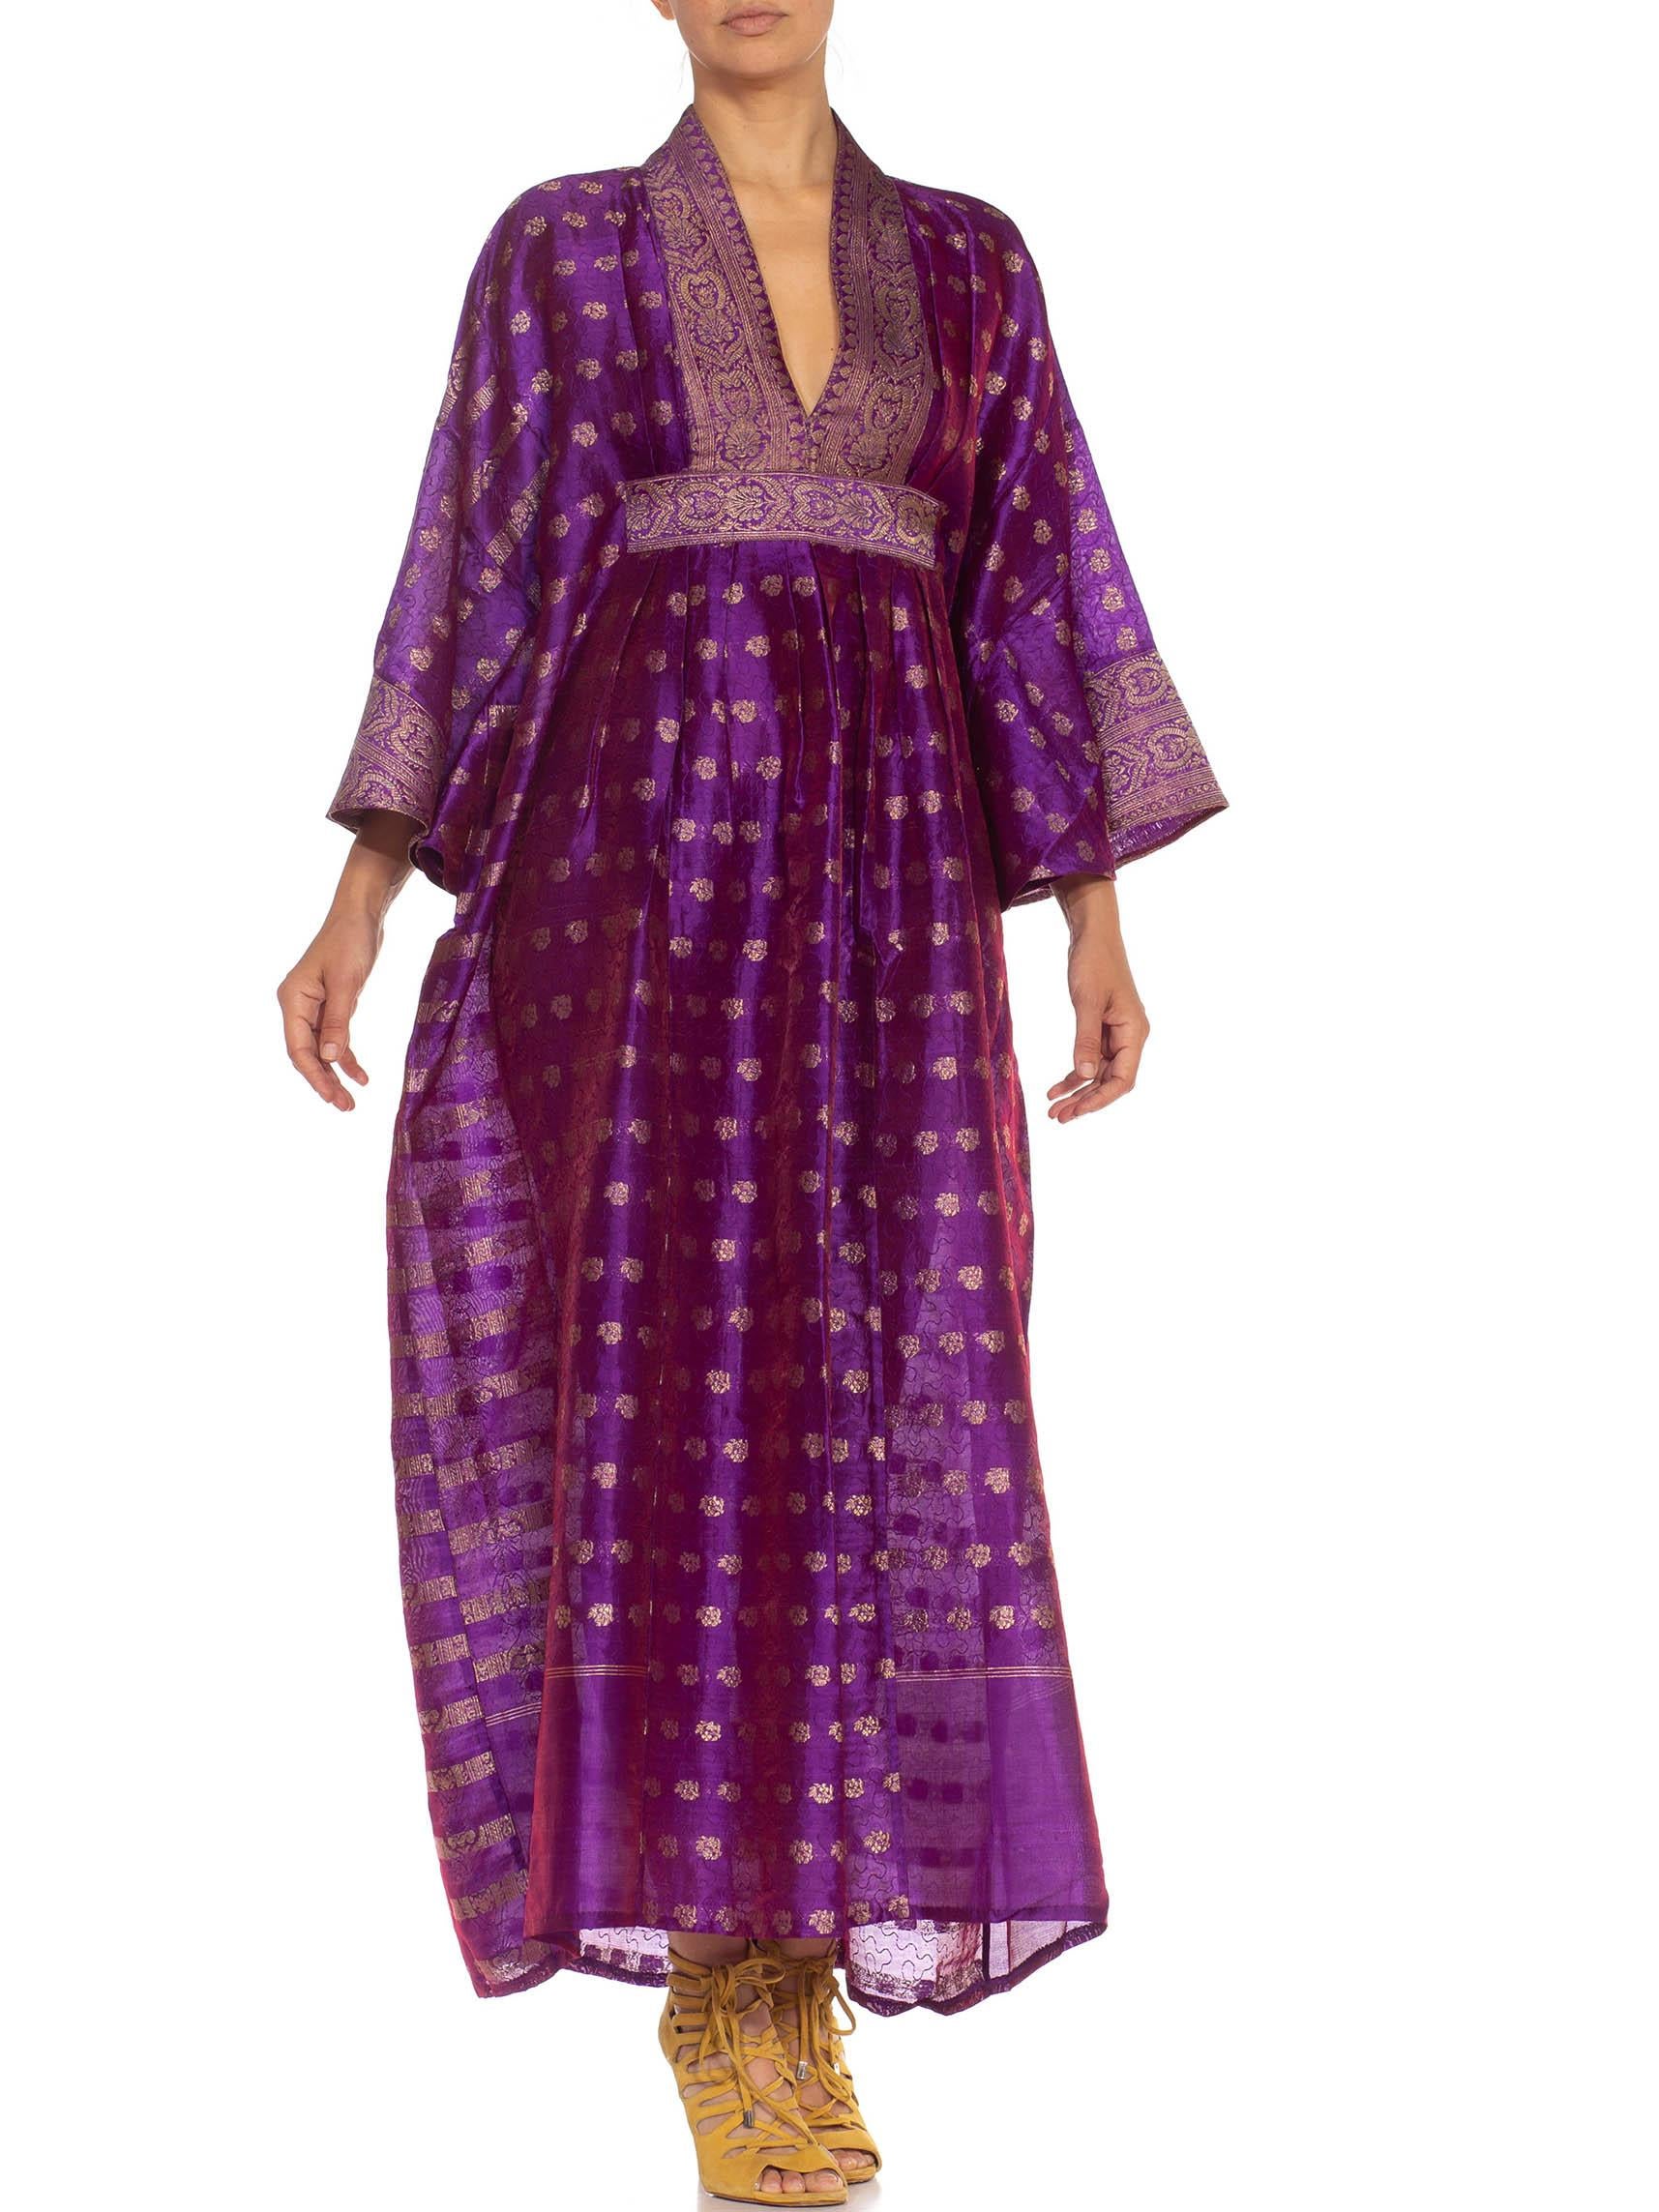 MORPHEW COLLECTION Purple & Gold Silk Kaftan Made From Vintage Saris For Sale 2